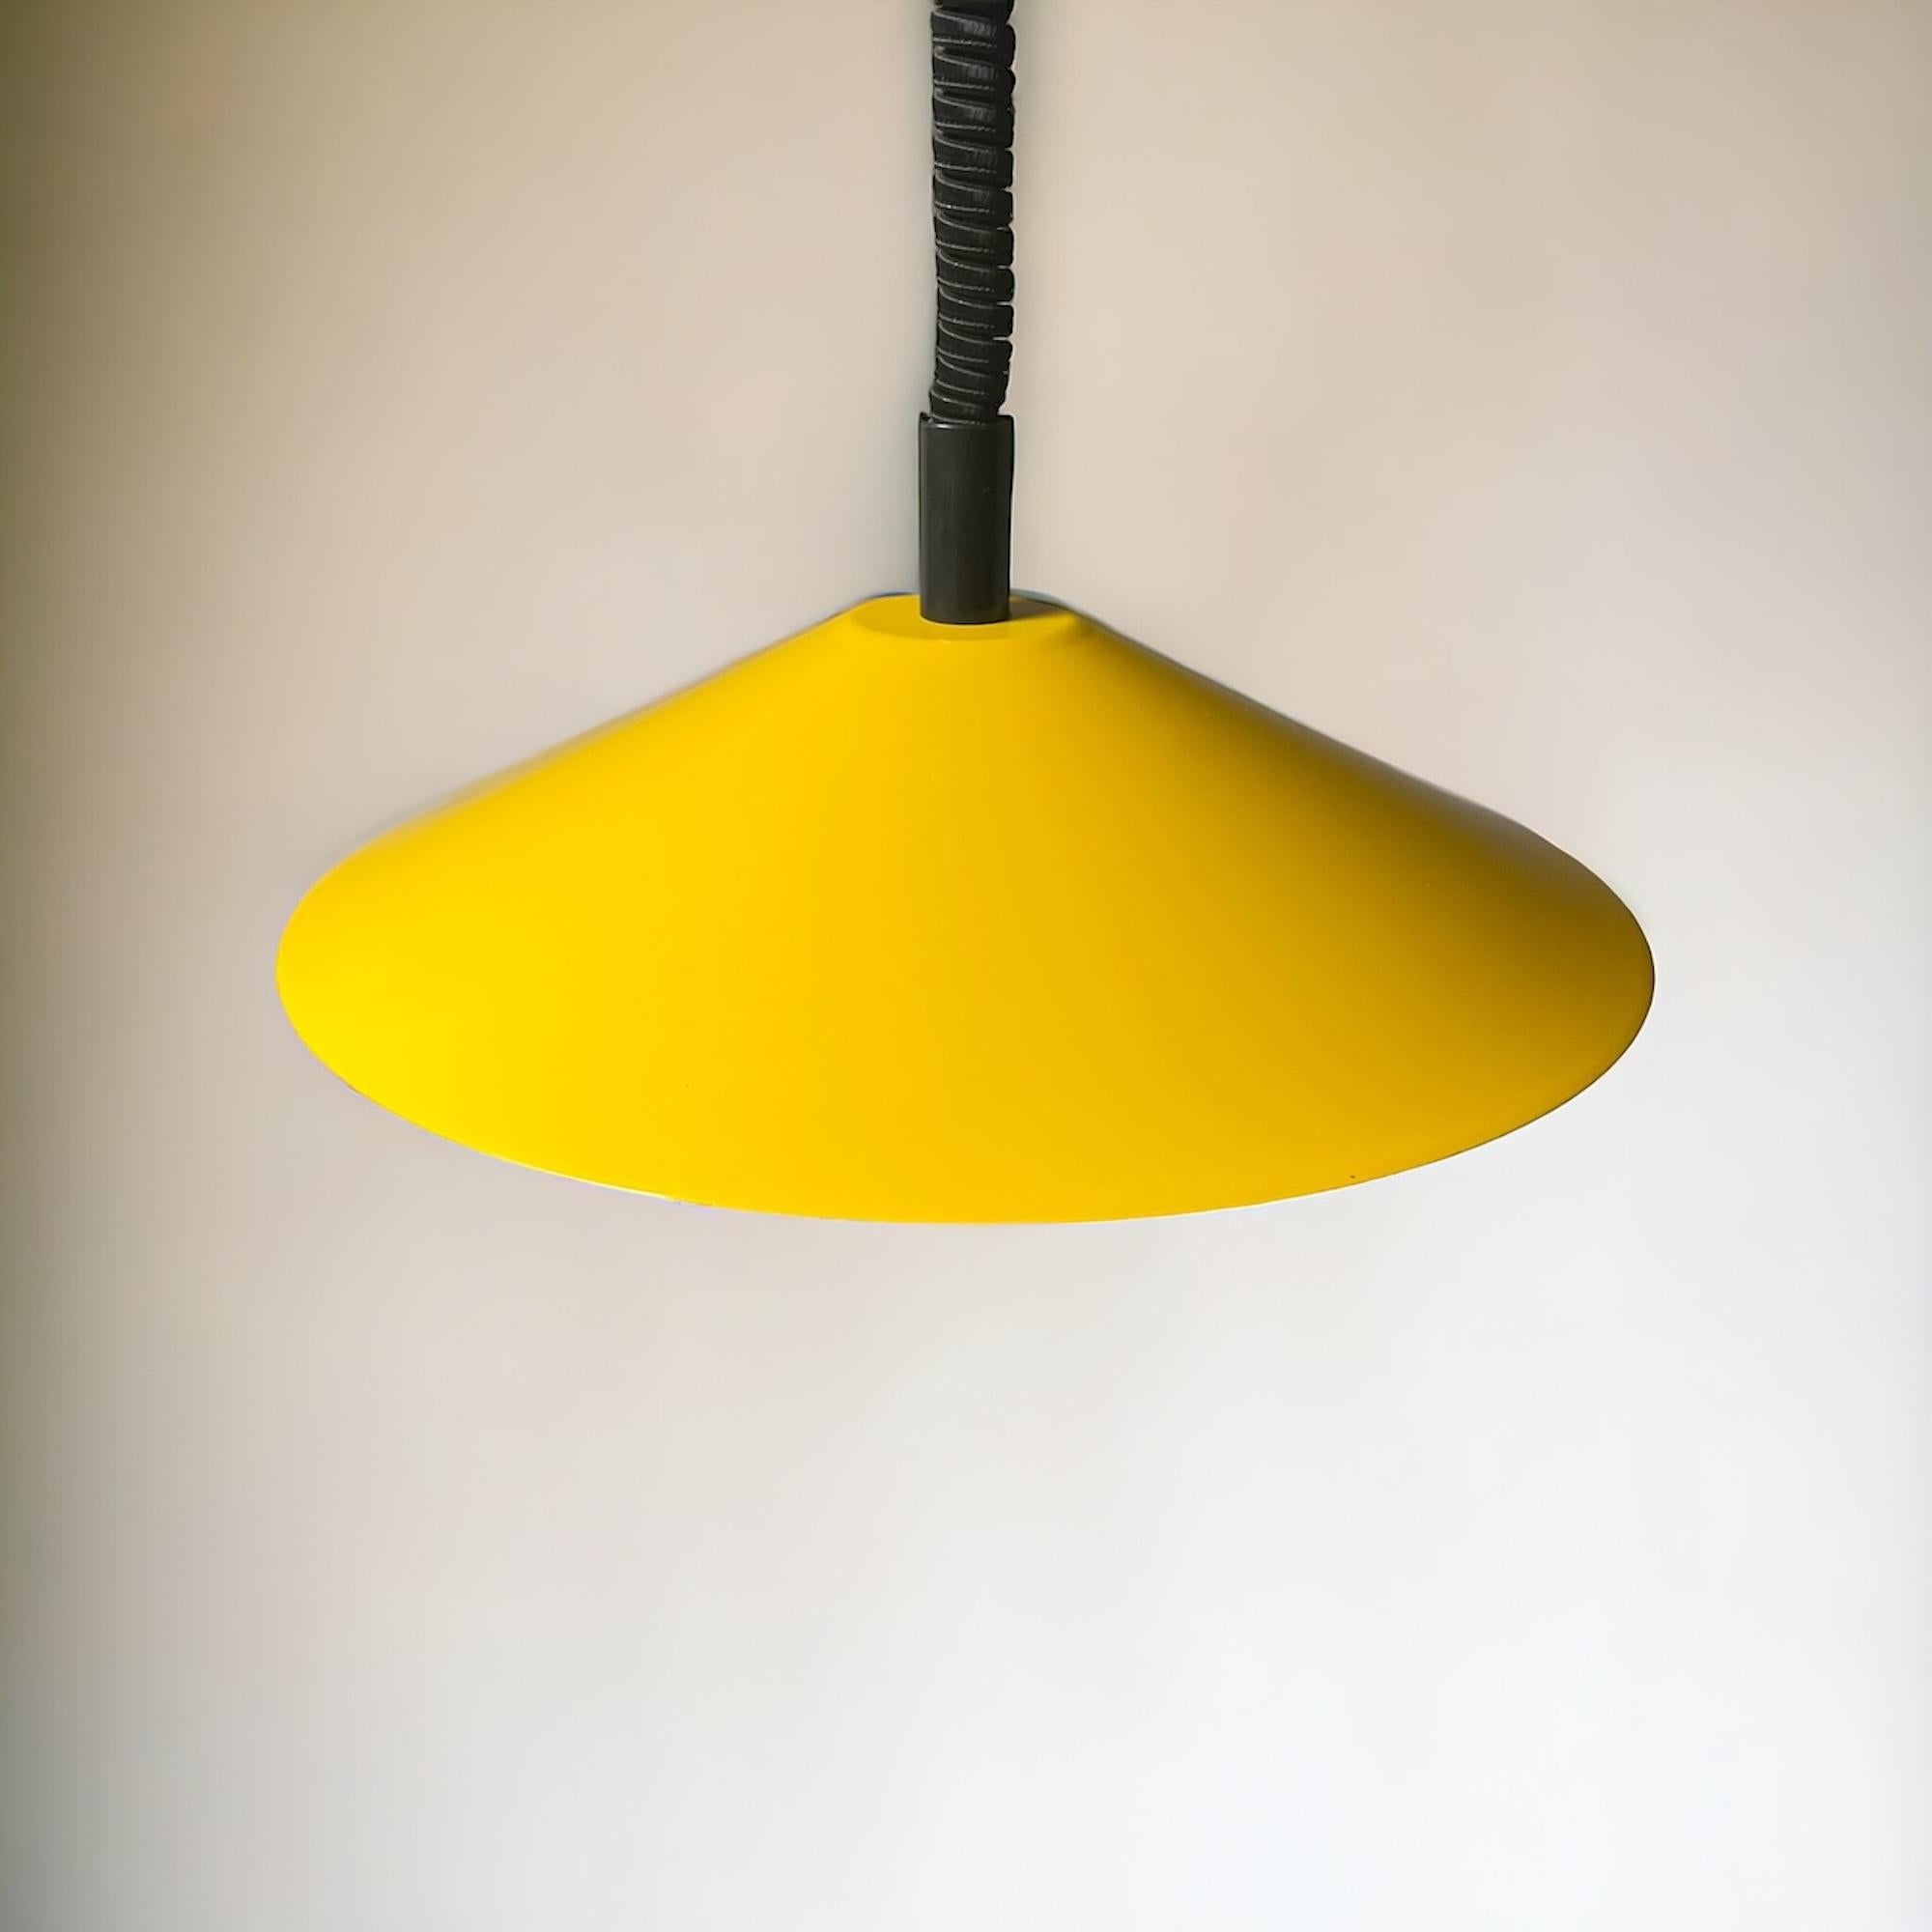 Vintage 1970s Italian Space Age Hanging Lamp - Vibrant Yellow Hue 4